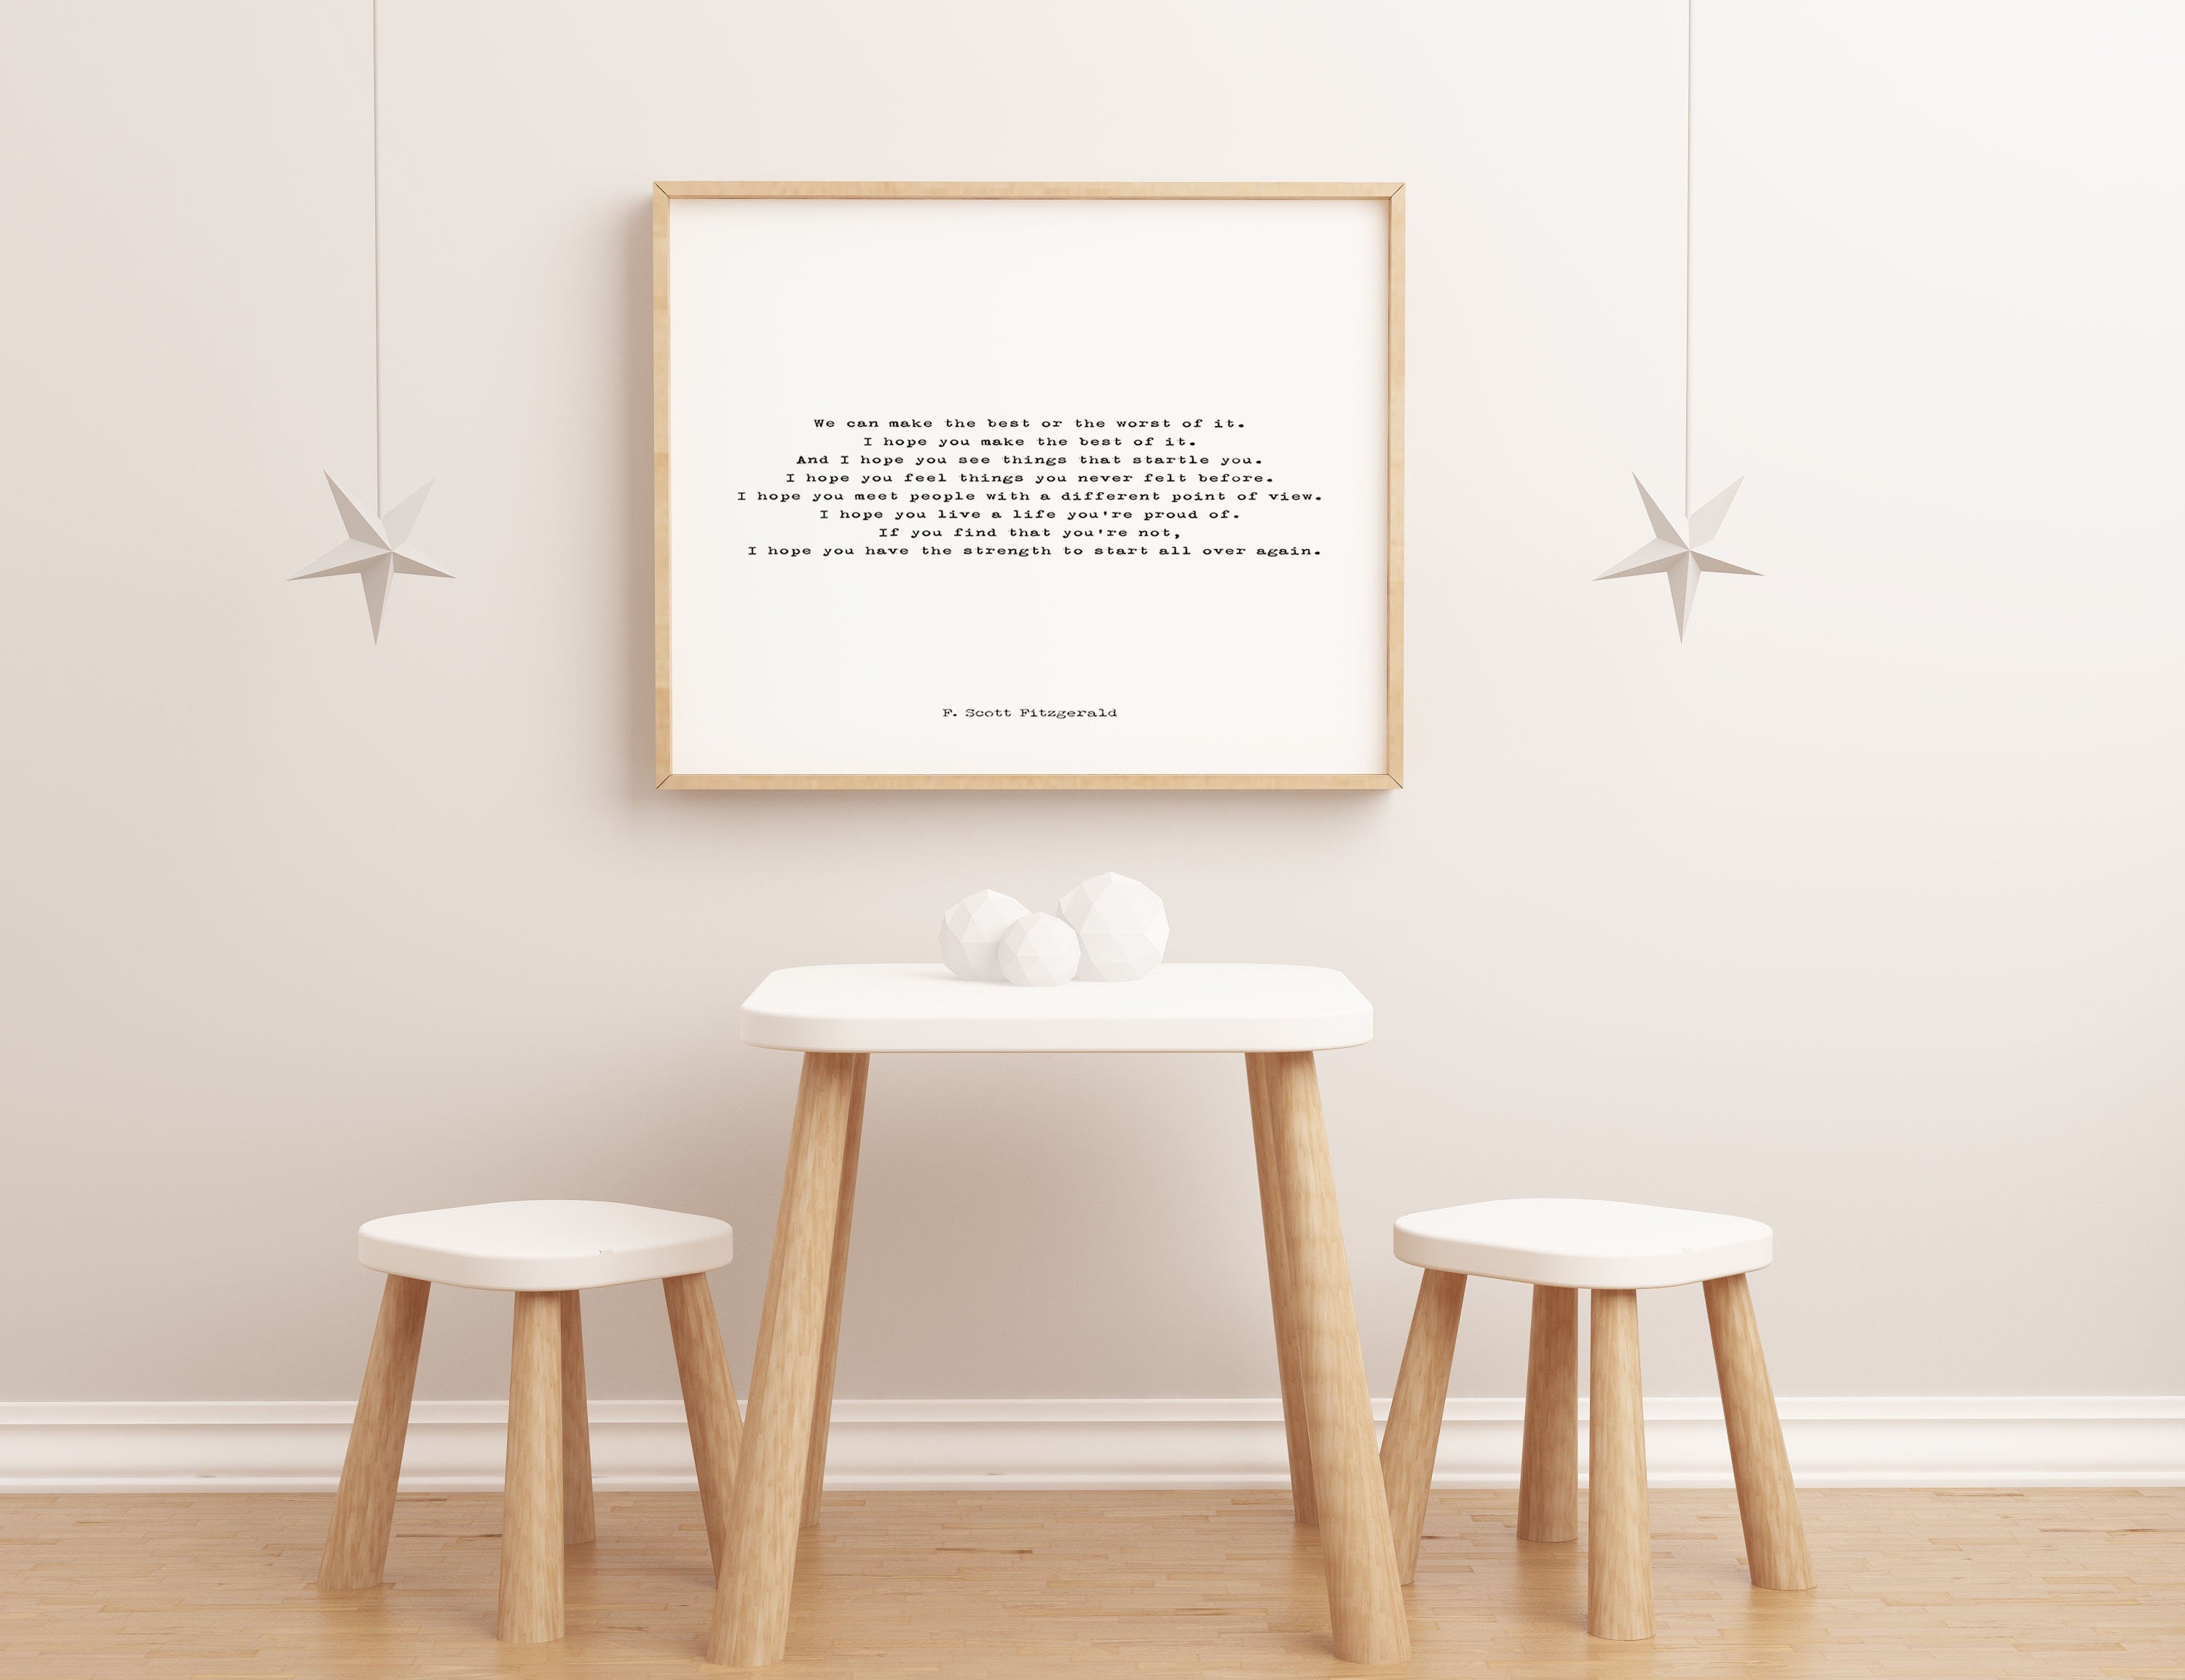 F Scott Fitzgerald Make The Best of It Living Room Wall Art Inspirational Gift, Unframed Typography Quote Print in Black & White